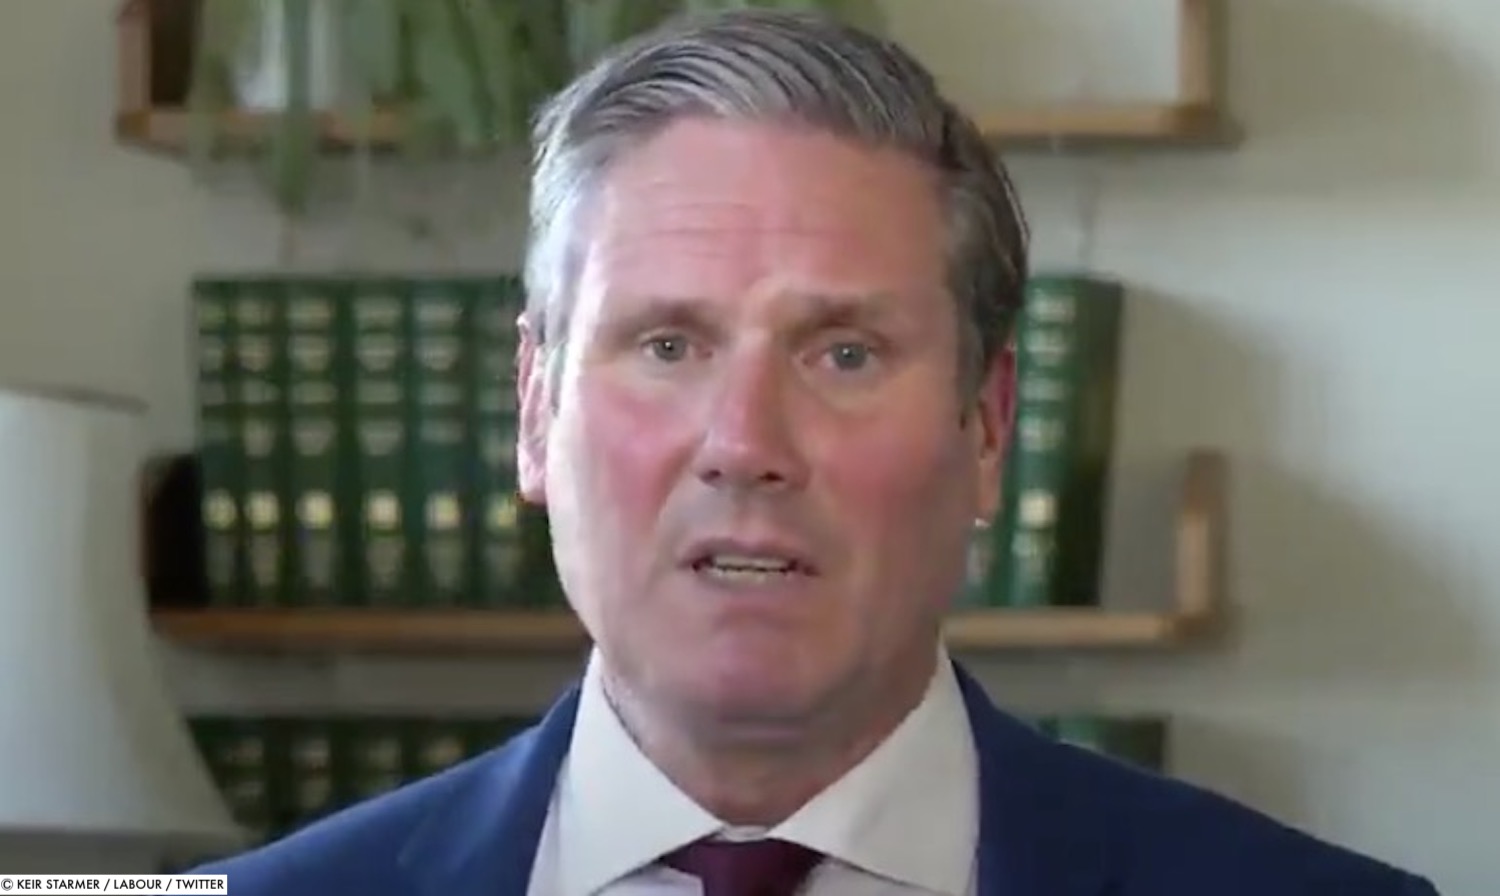 Has Sir Keir Starmer always supported LGBT+ rights?